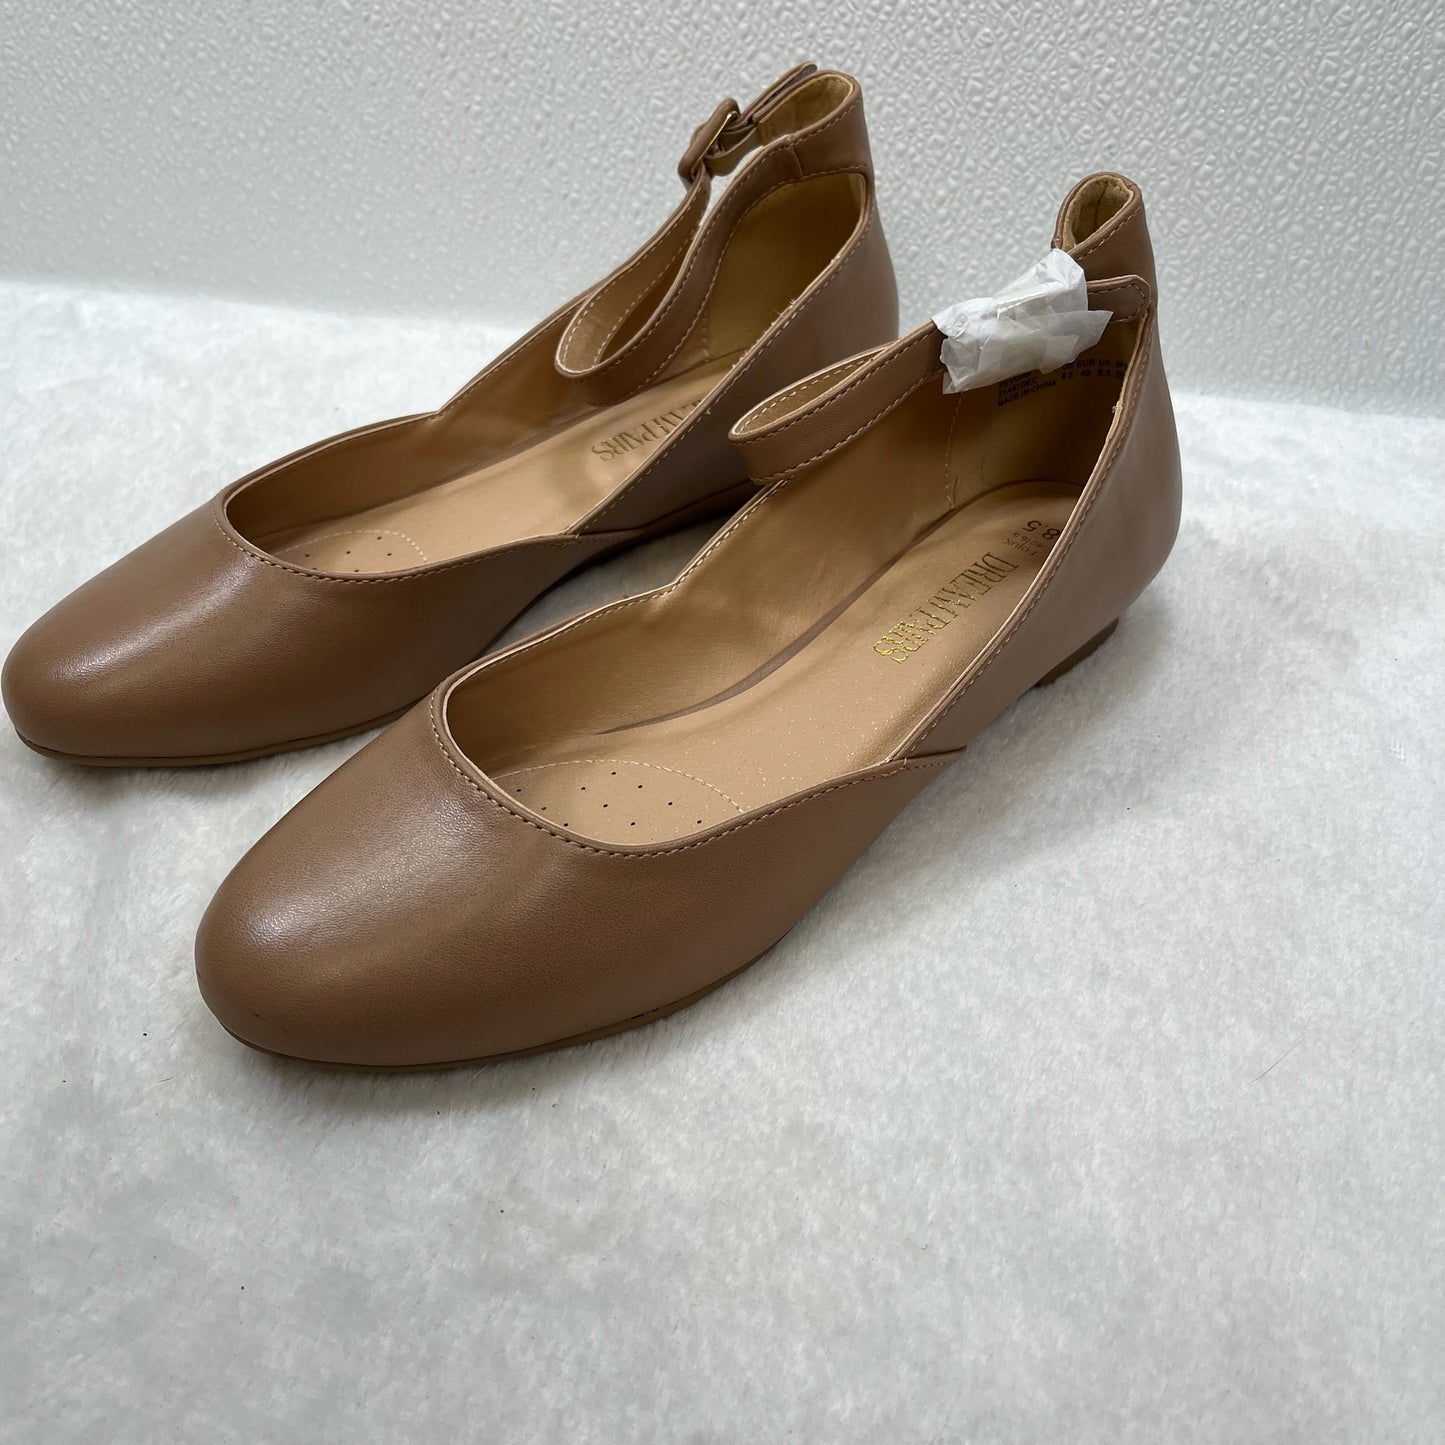 Shoes Flats Ballet By Clothes Mentor  Size: 8.5